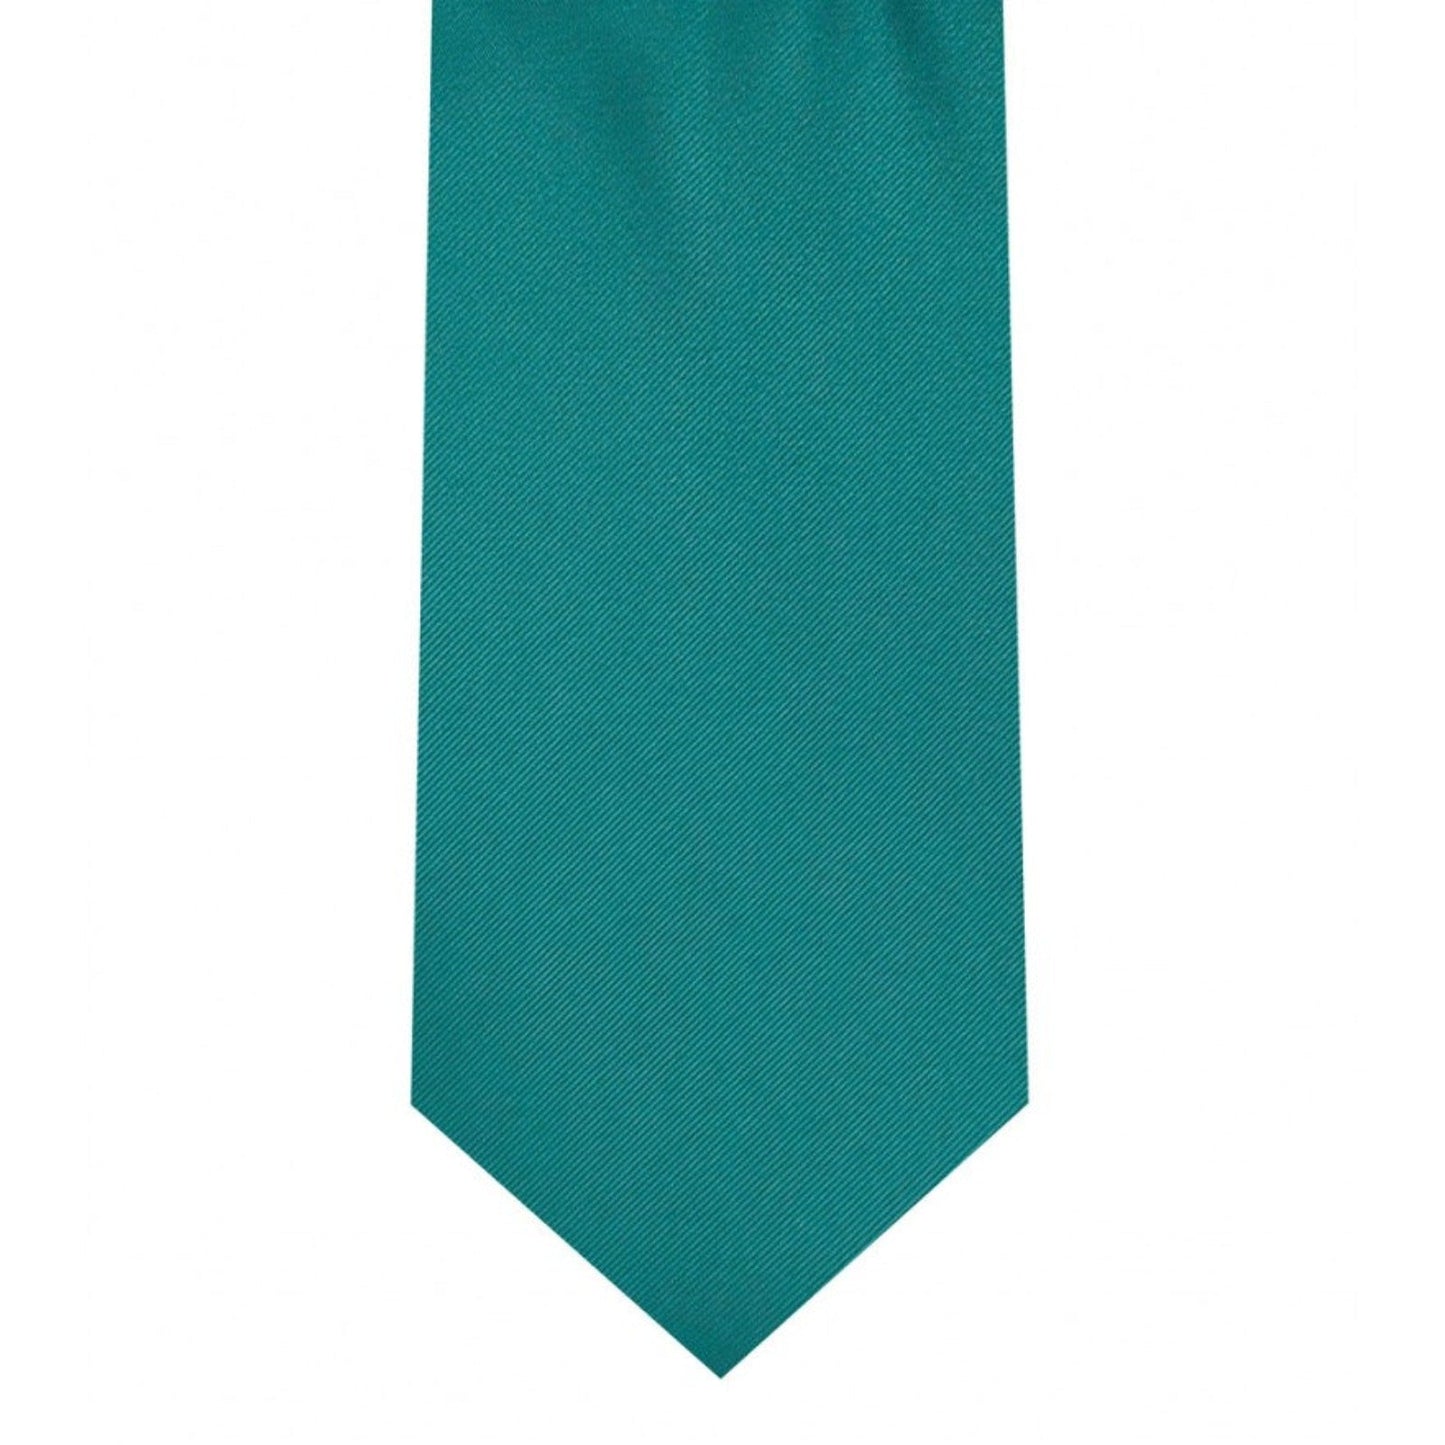 Classic Teal Tie Skinny width 2.75 inches With Matching Pocket Square | KCT Menswear